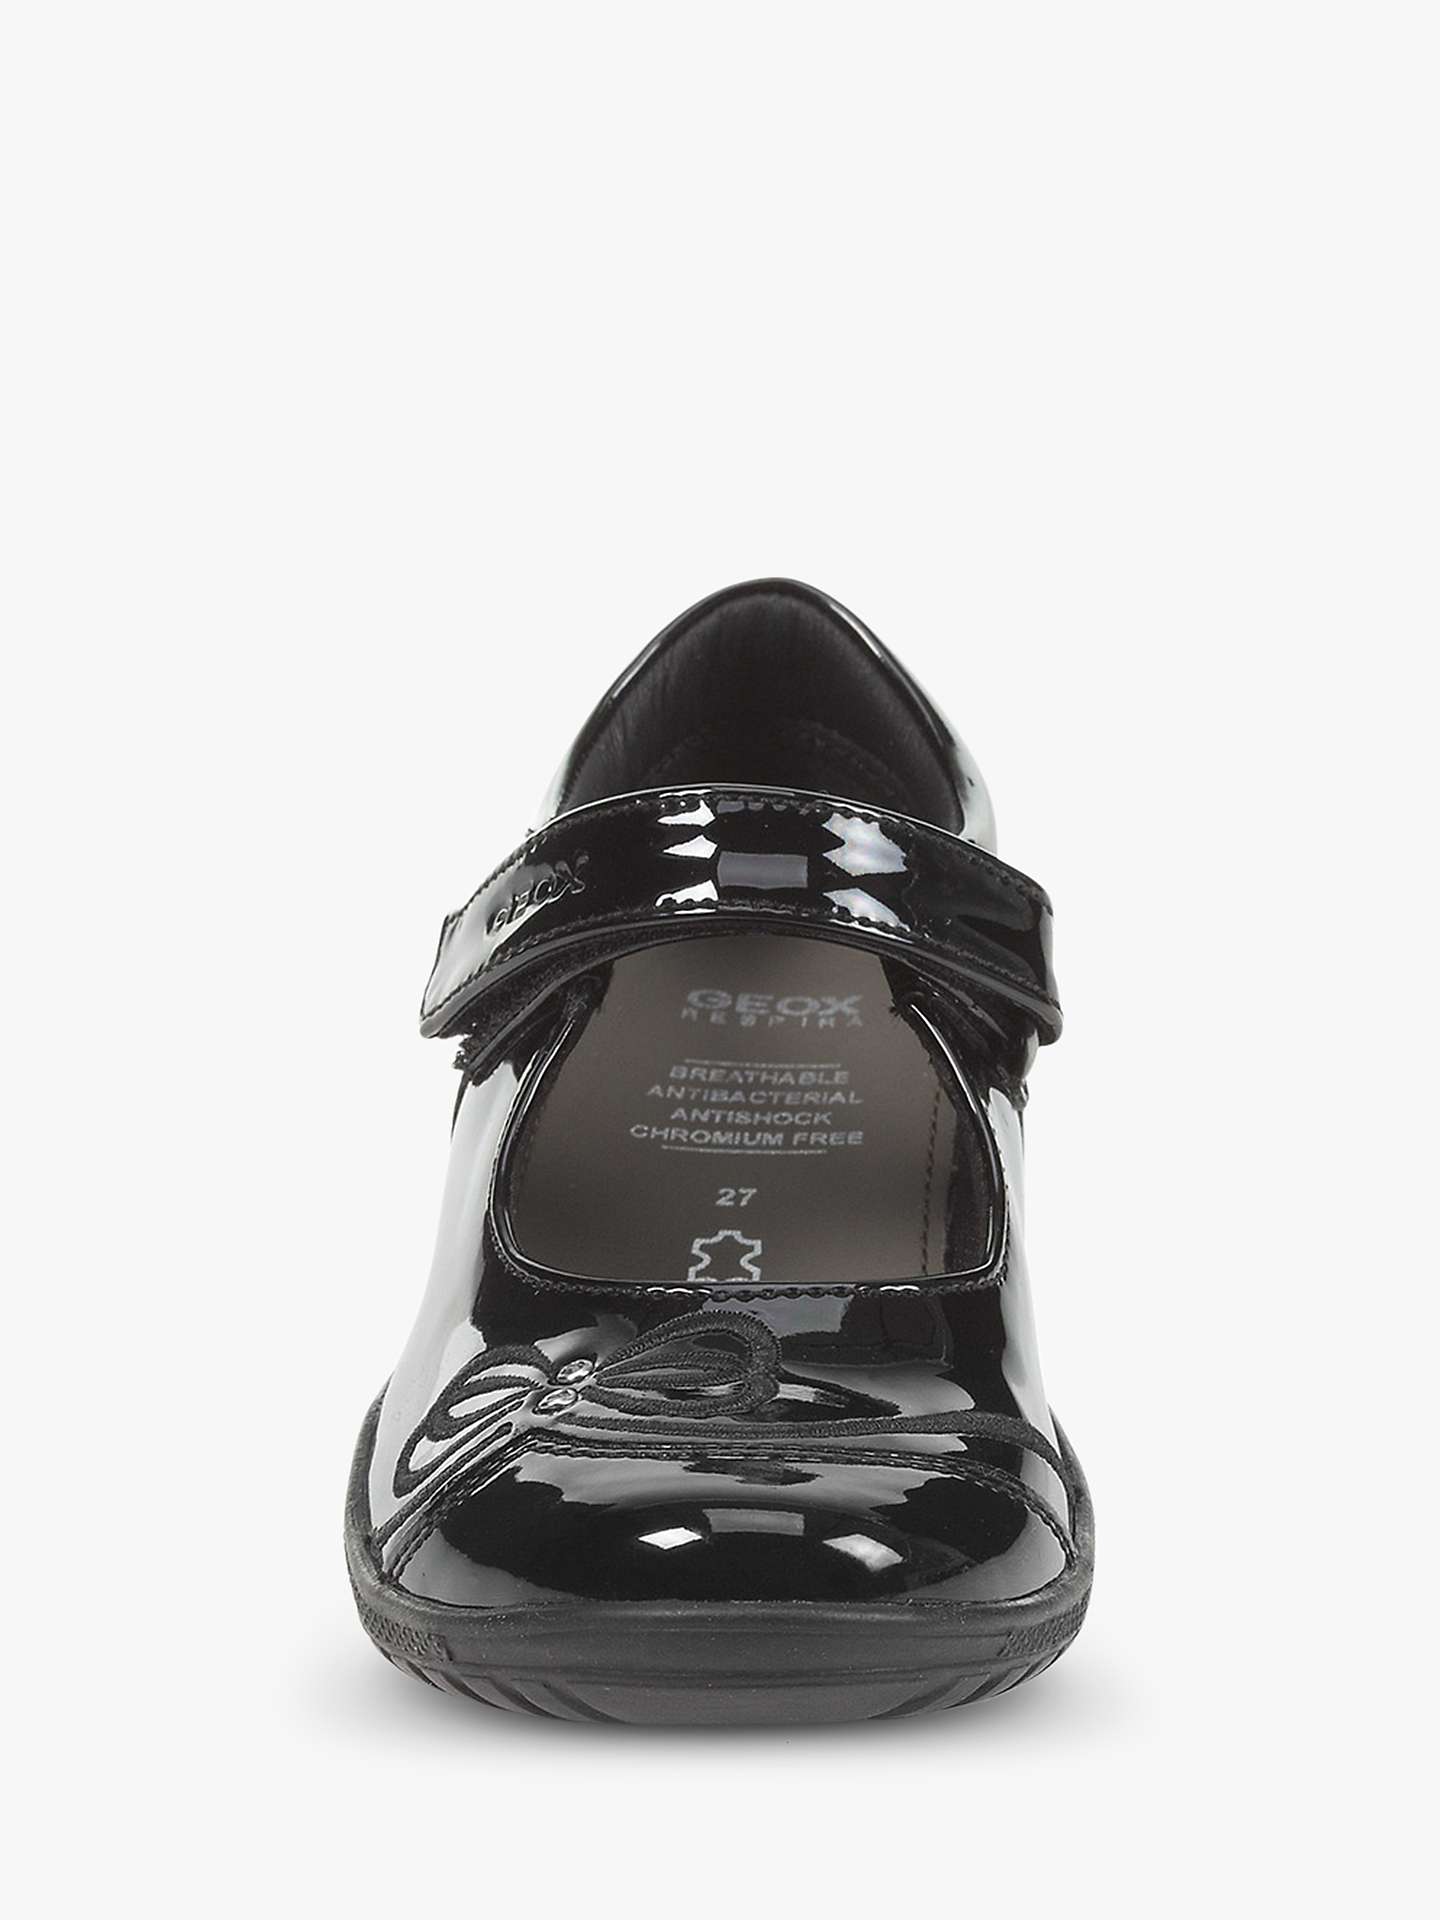 Buy Geox Children's Shadow Mary Jane School Shoes, Black Patent Online at johnlewis.com